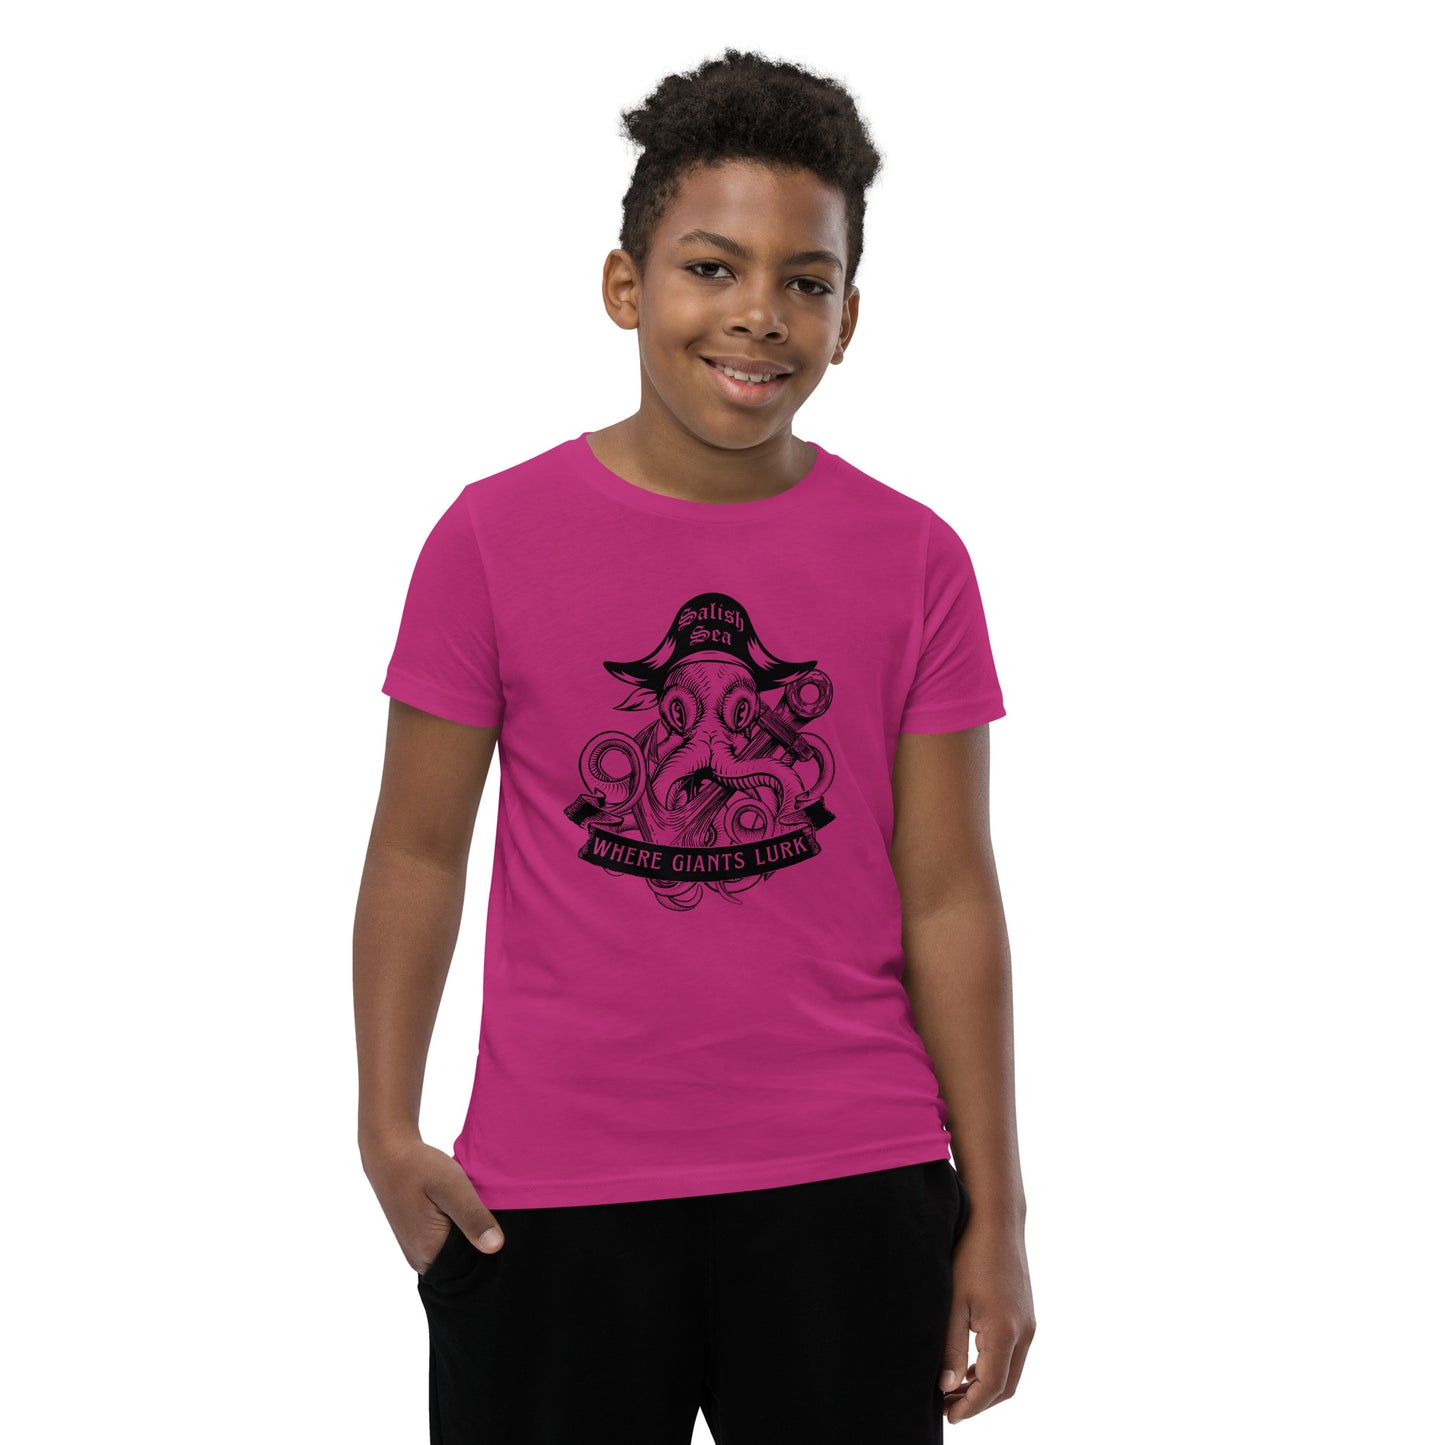 Youth / Teen - "Octo Pirate" - Short Sleeve T-Shirt